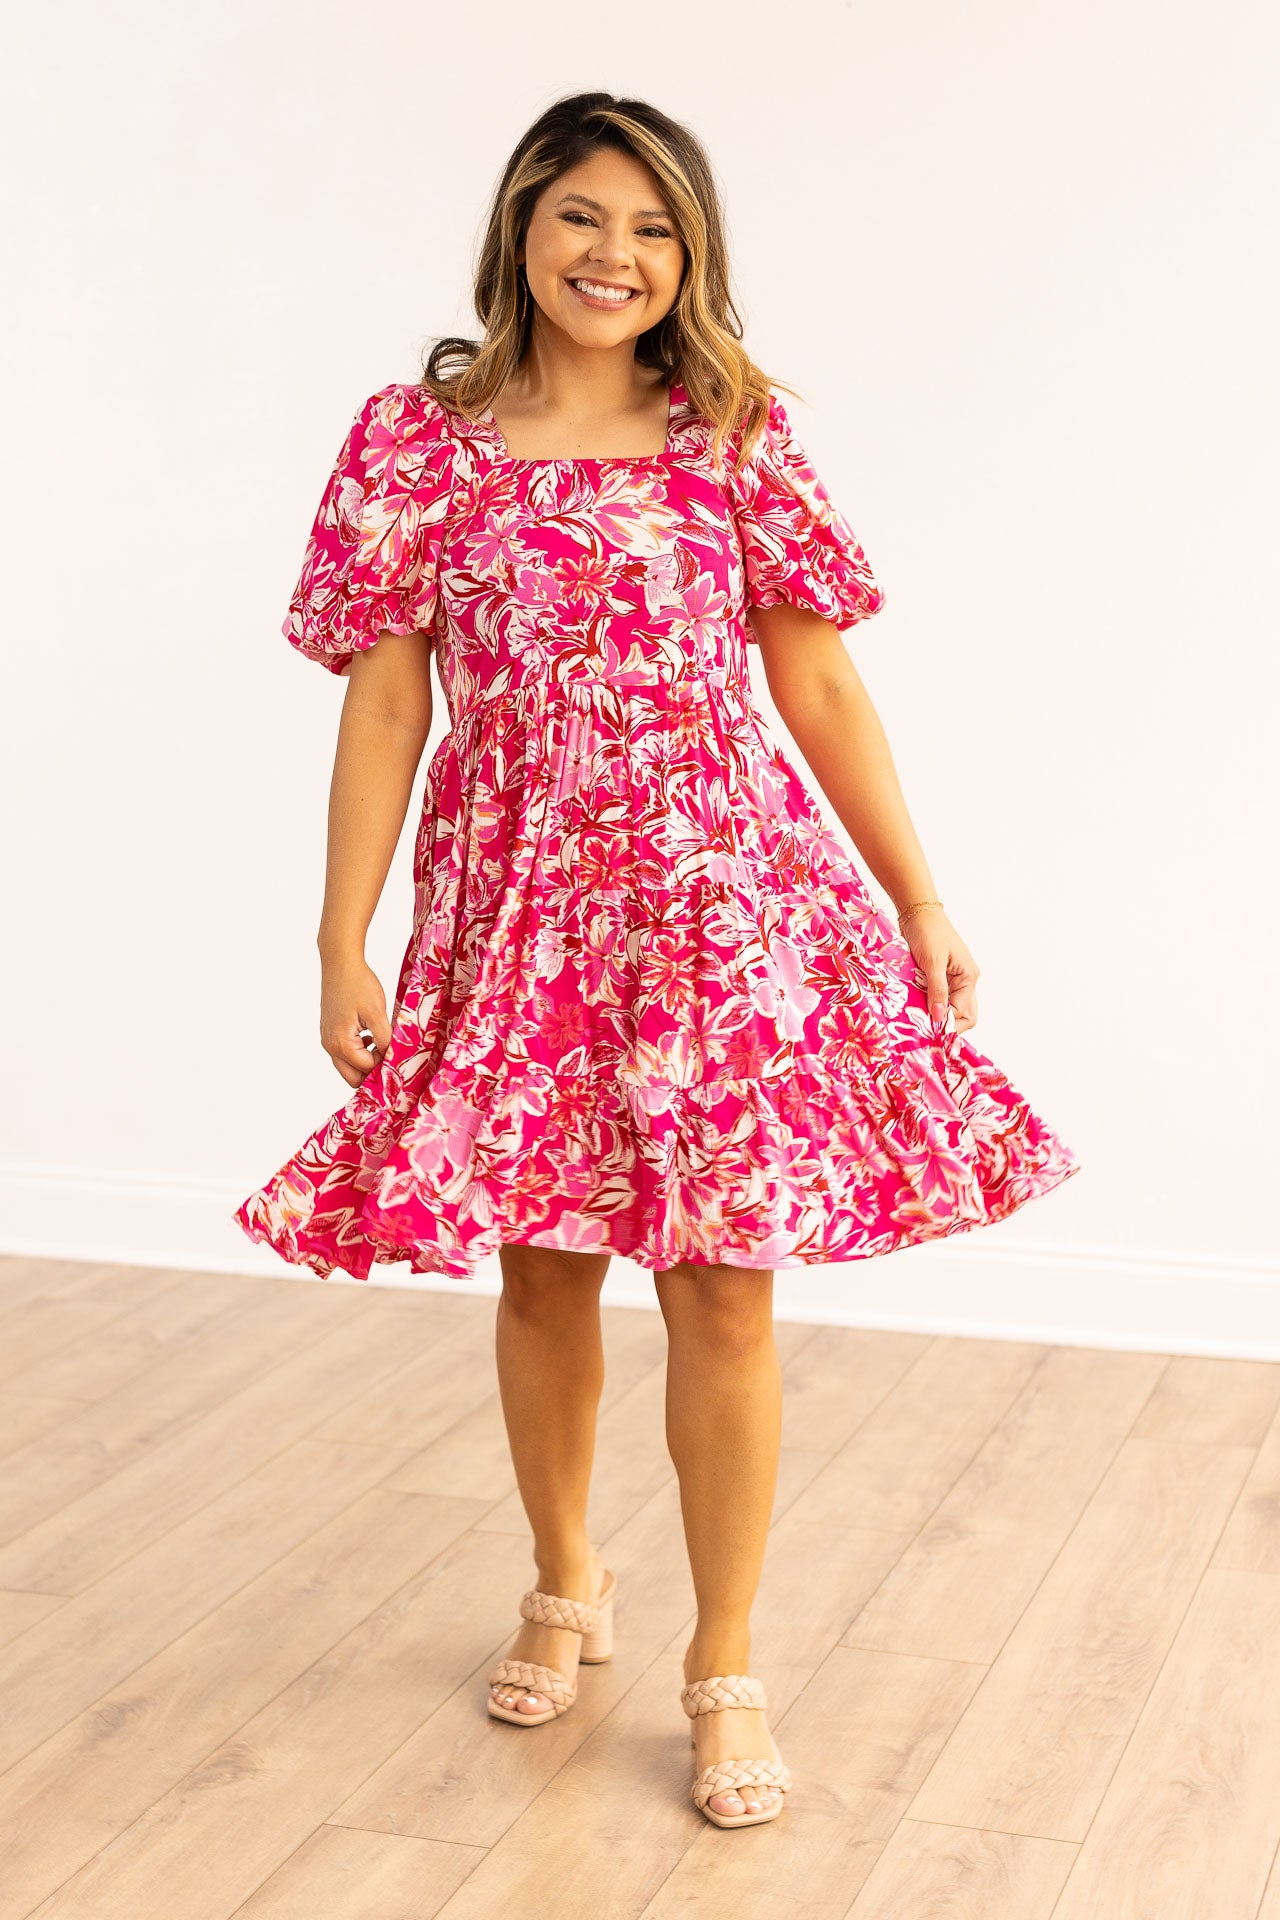 Dolly Doll Butter Chiffon Dress, Pink Floral